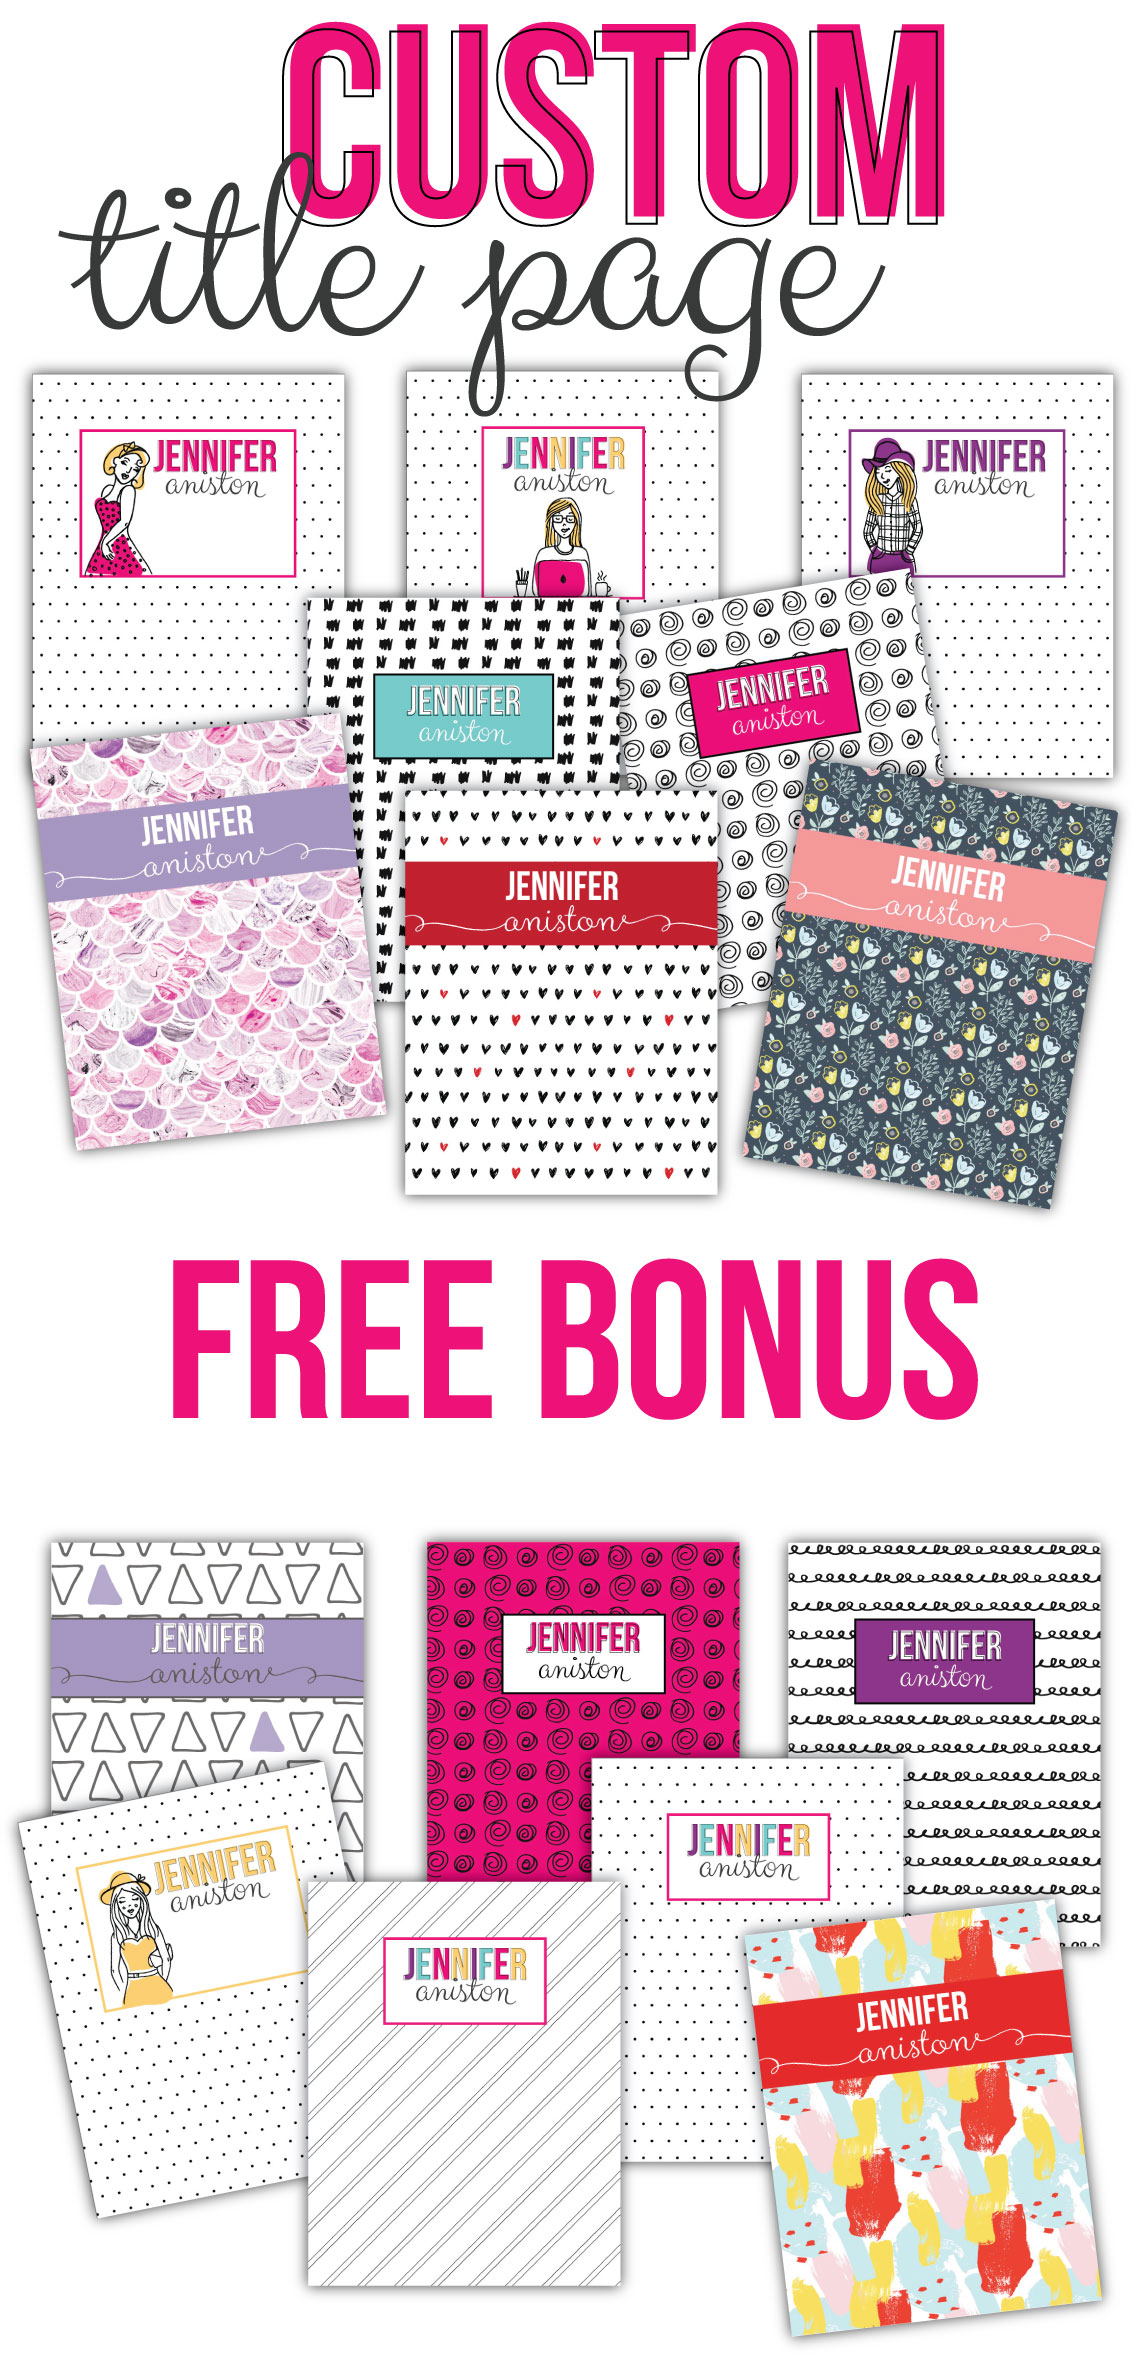 Custom Printable Planner Cover Pages! I love all this colorful cover pages for your notebook, binder, or planner. It can say your name or other custom text like “budget binder” or “recipe binder”.